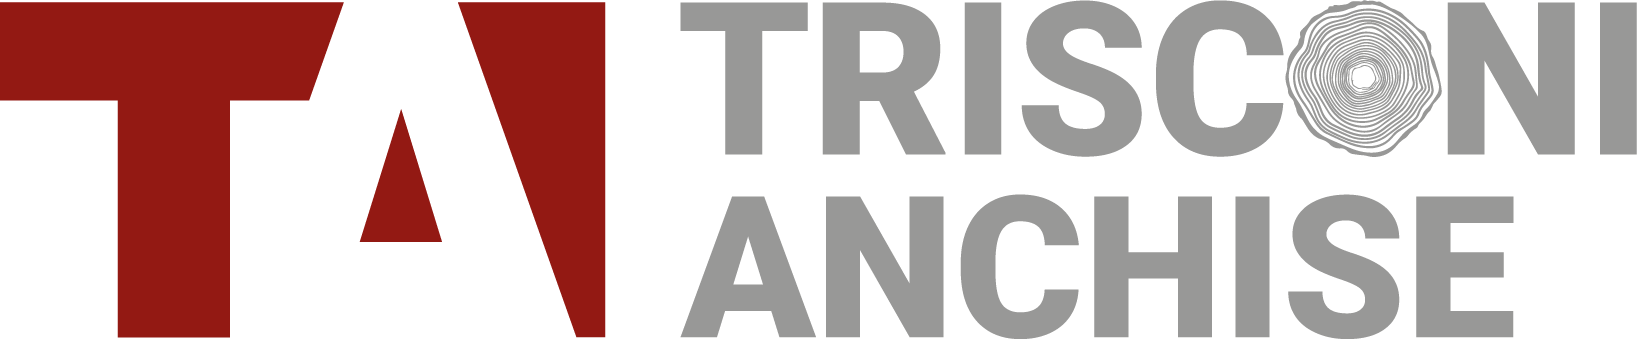 cropped-LOGO_TRISCONI_ANCHISE.png